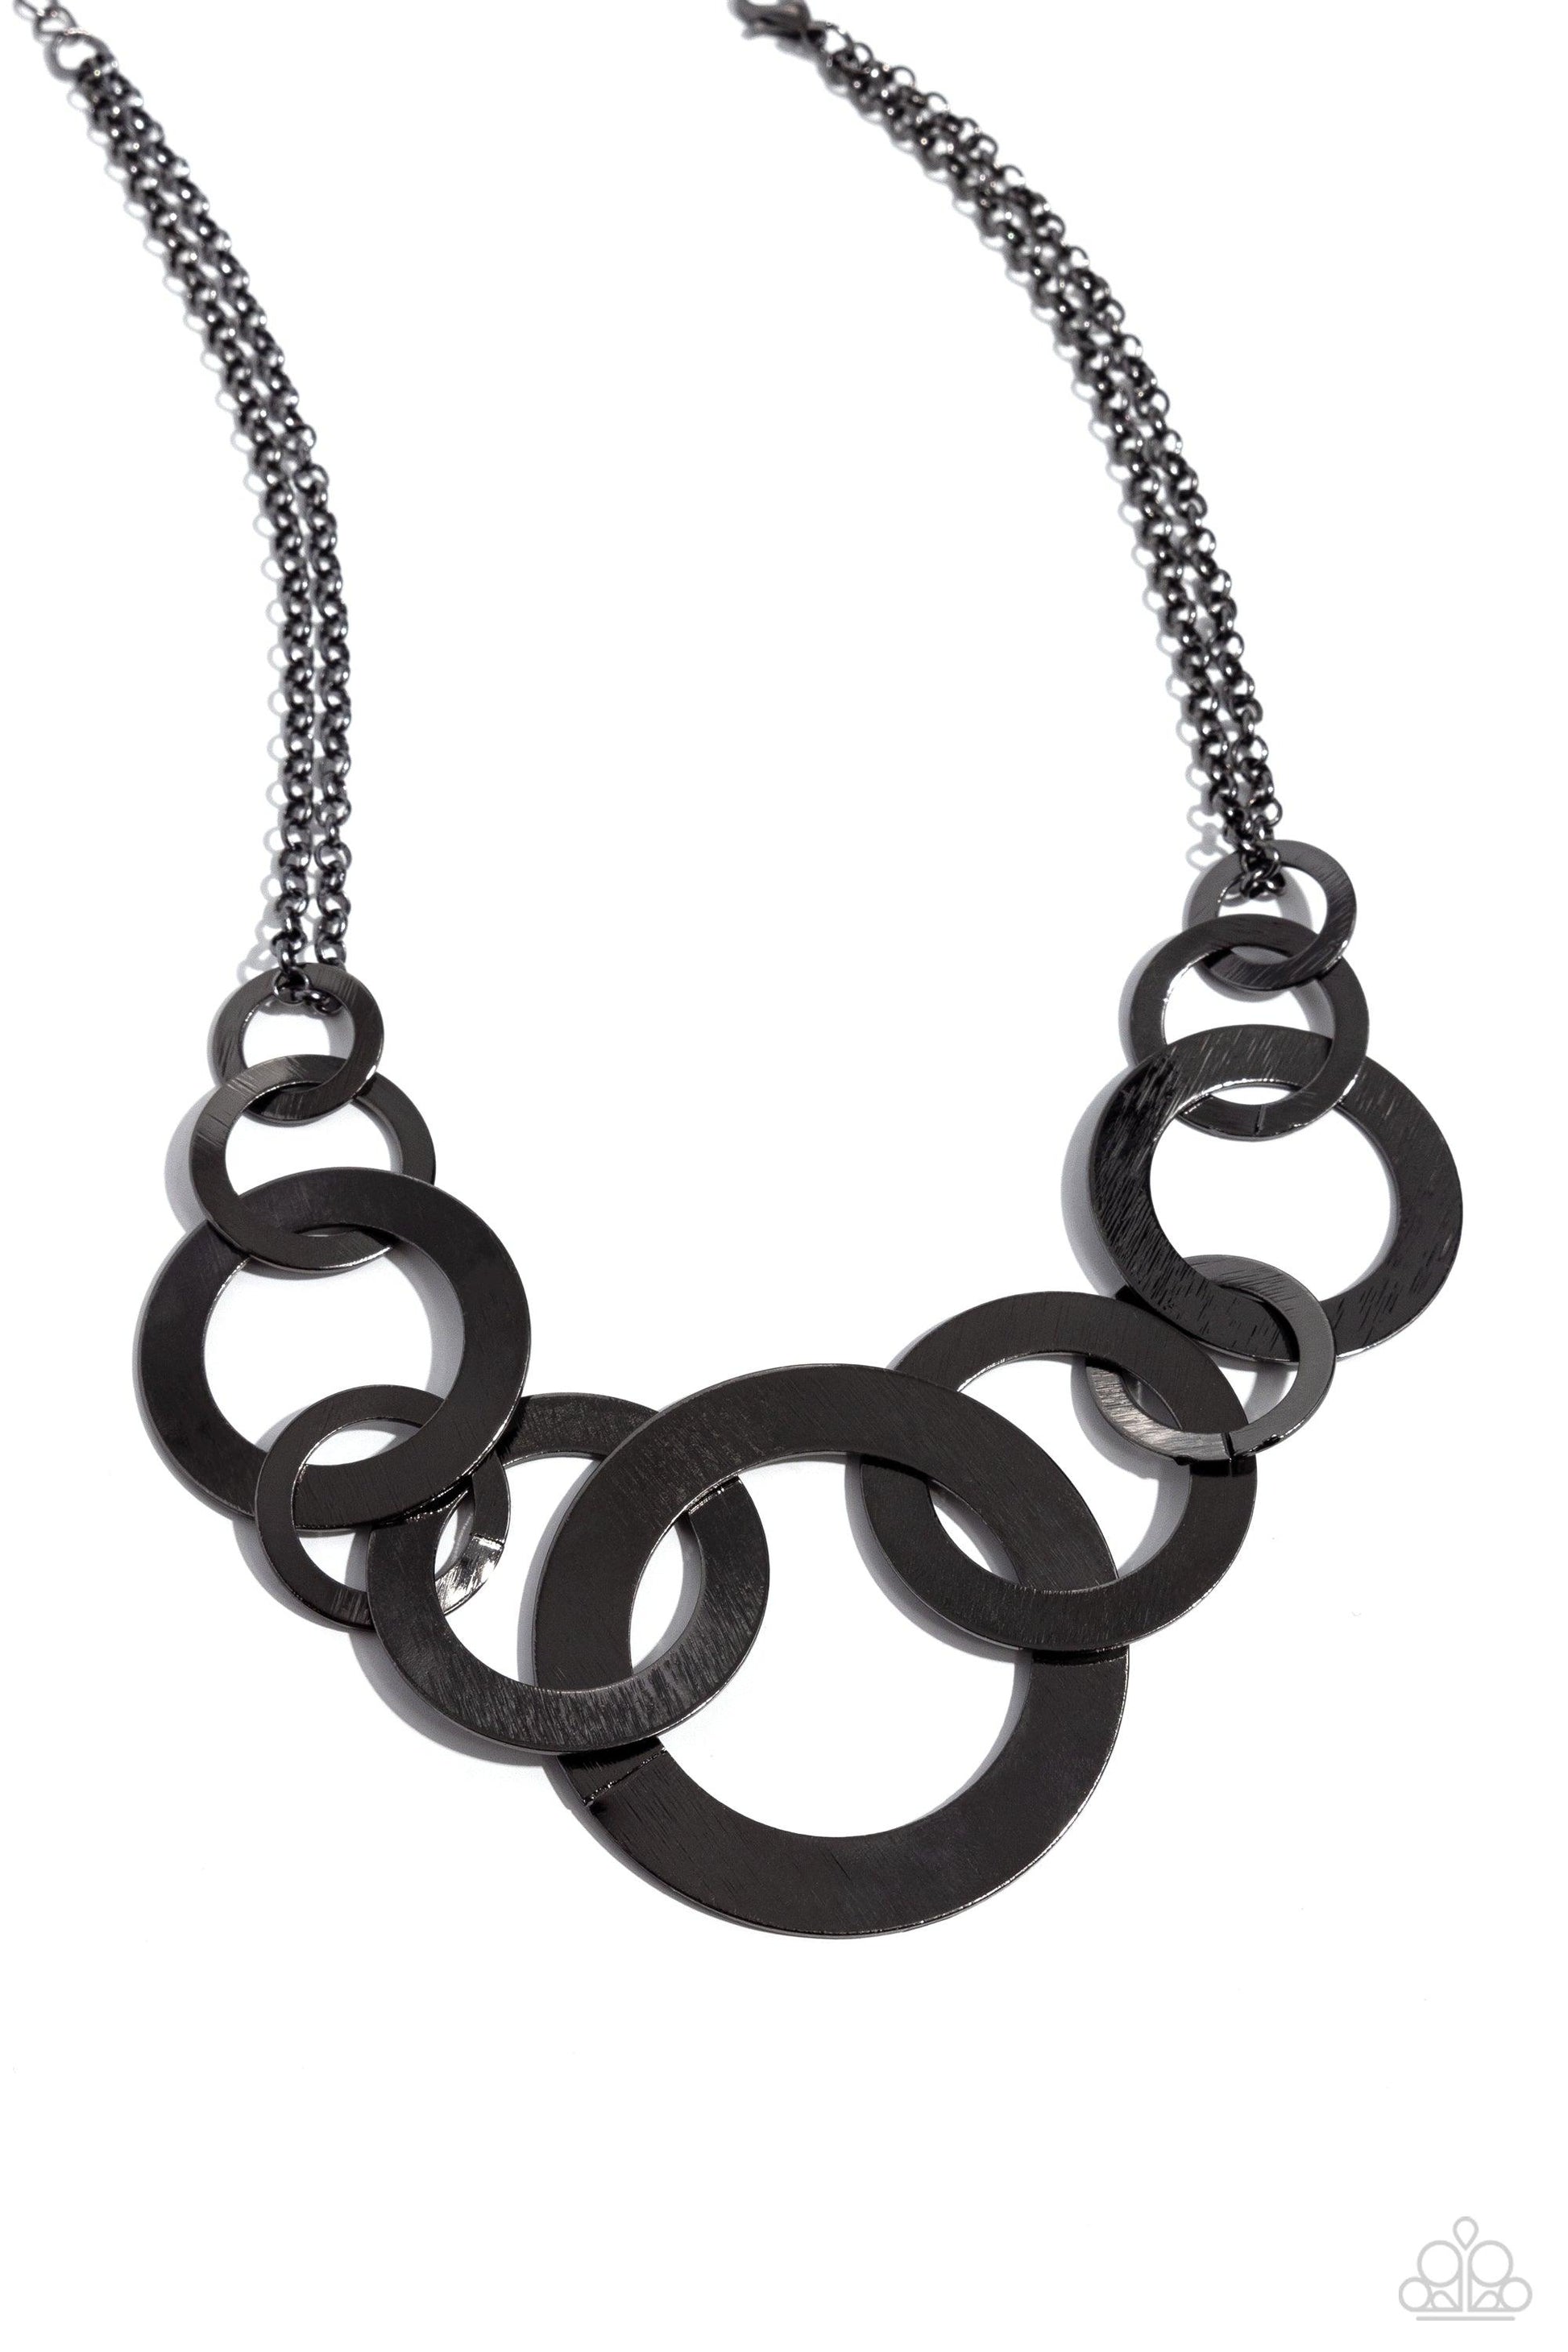 Paparazzi Accessories - Uptown Links - Black Necklace - Bling by JessieK